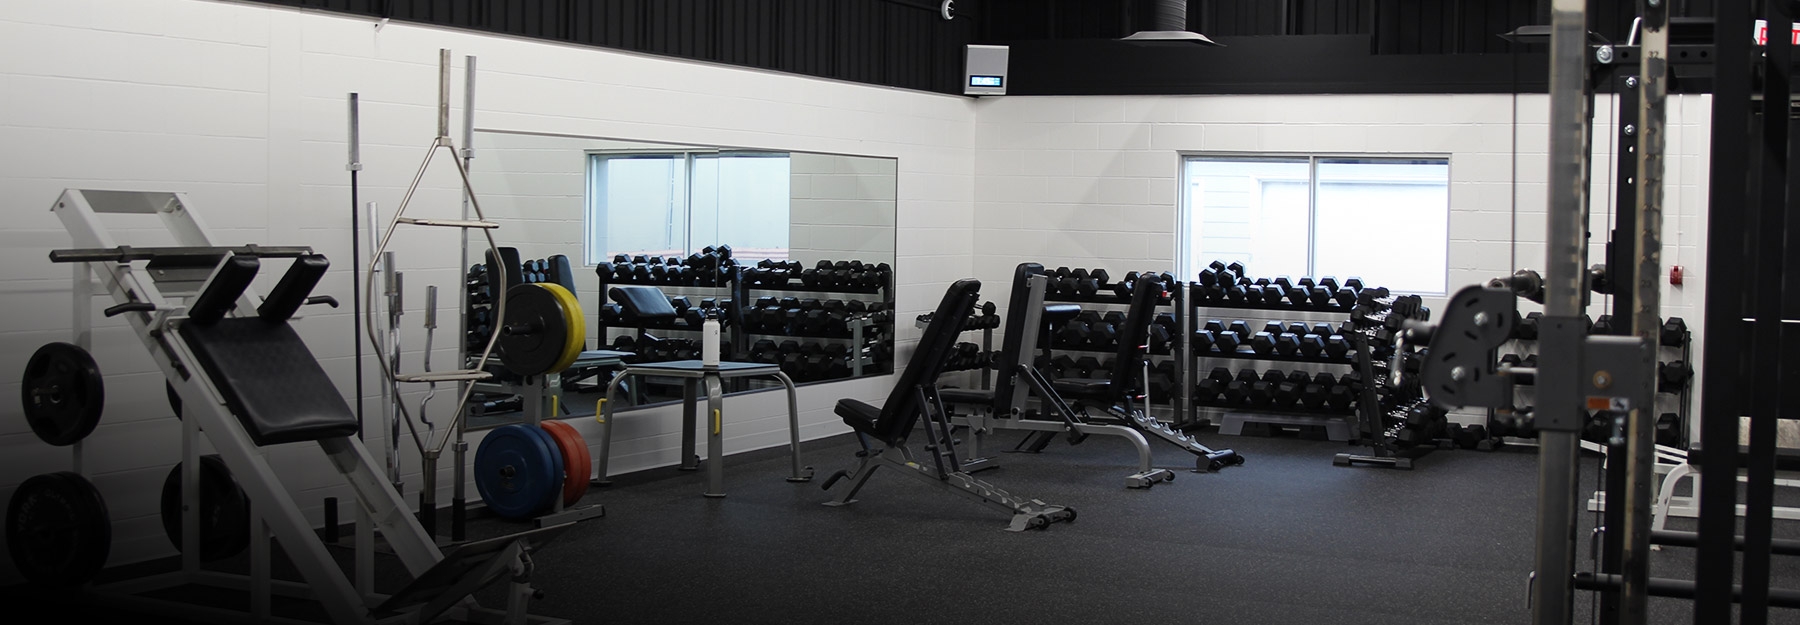 Fitness Centre with weight lifting equipment positioned along white walls with mirrors and windows.